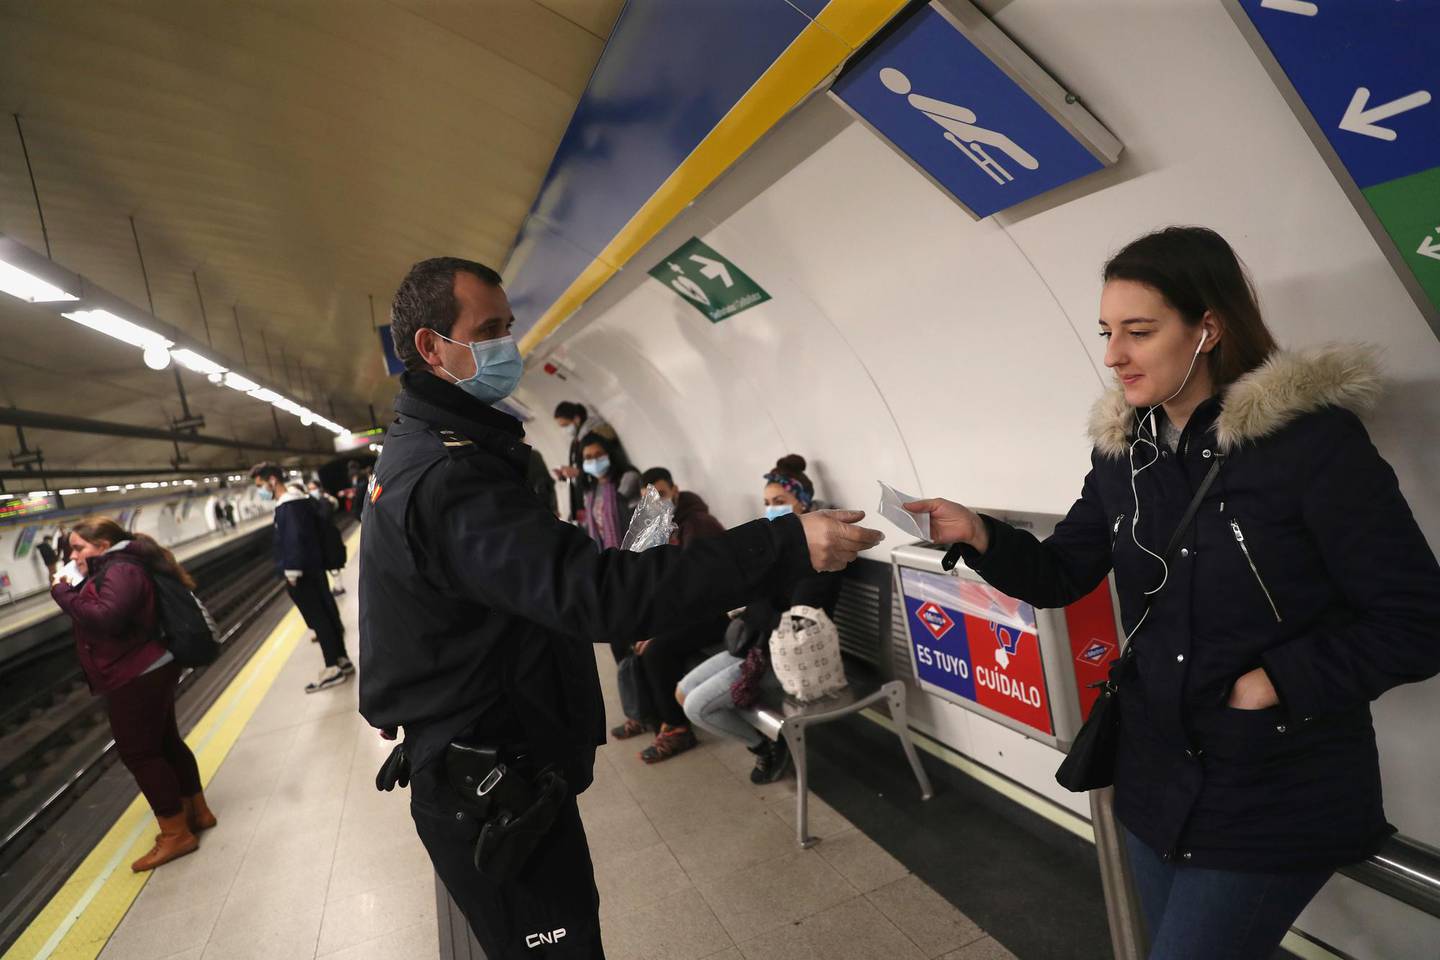 A police officer gives out free protective face masks at a metro station during the lockdown amid the coronavirus disease (COVID-19) outbreak in Madrid, Spain, April 13, 2020. REUTERS/Susana Vera